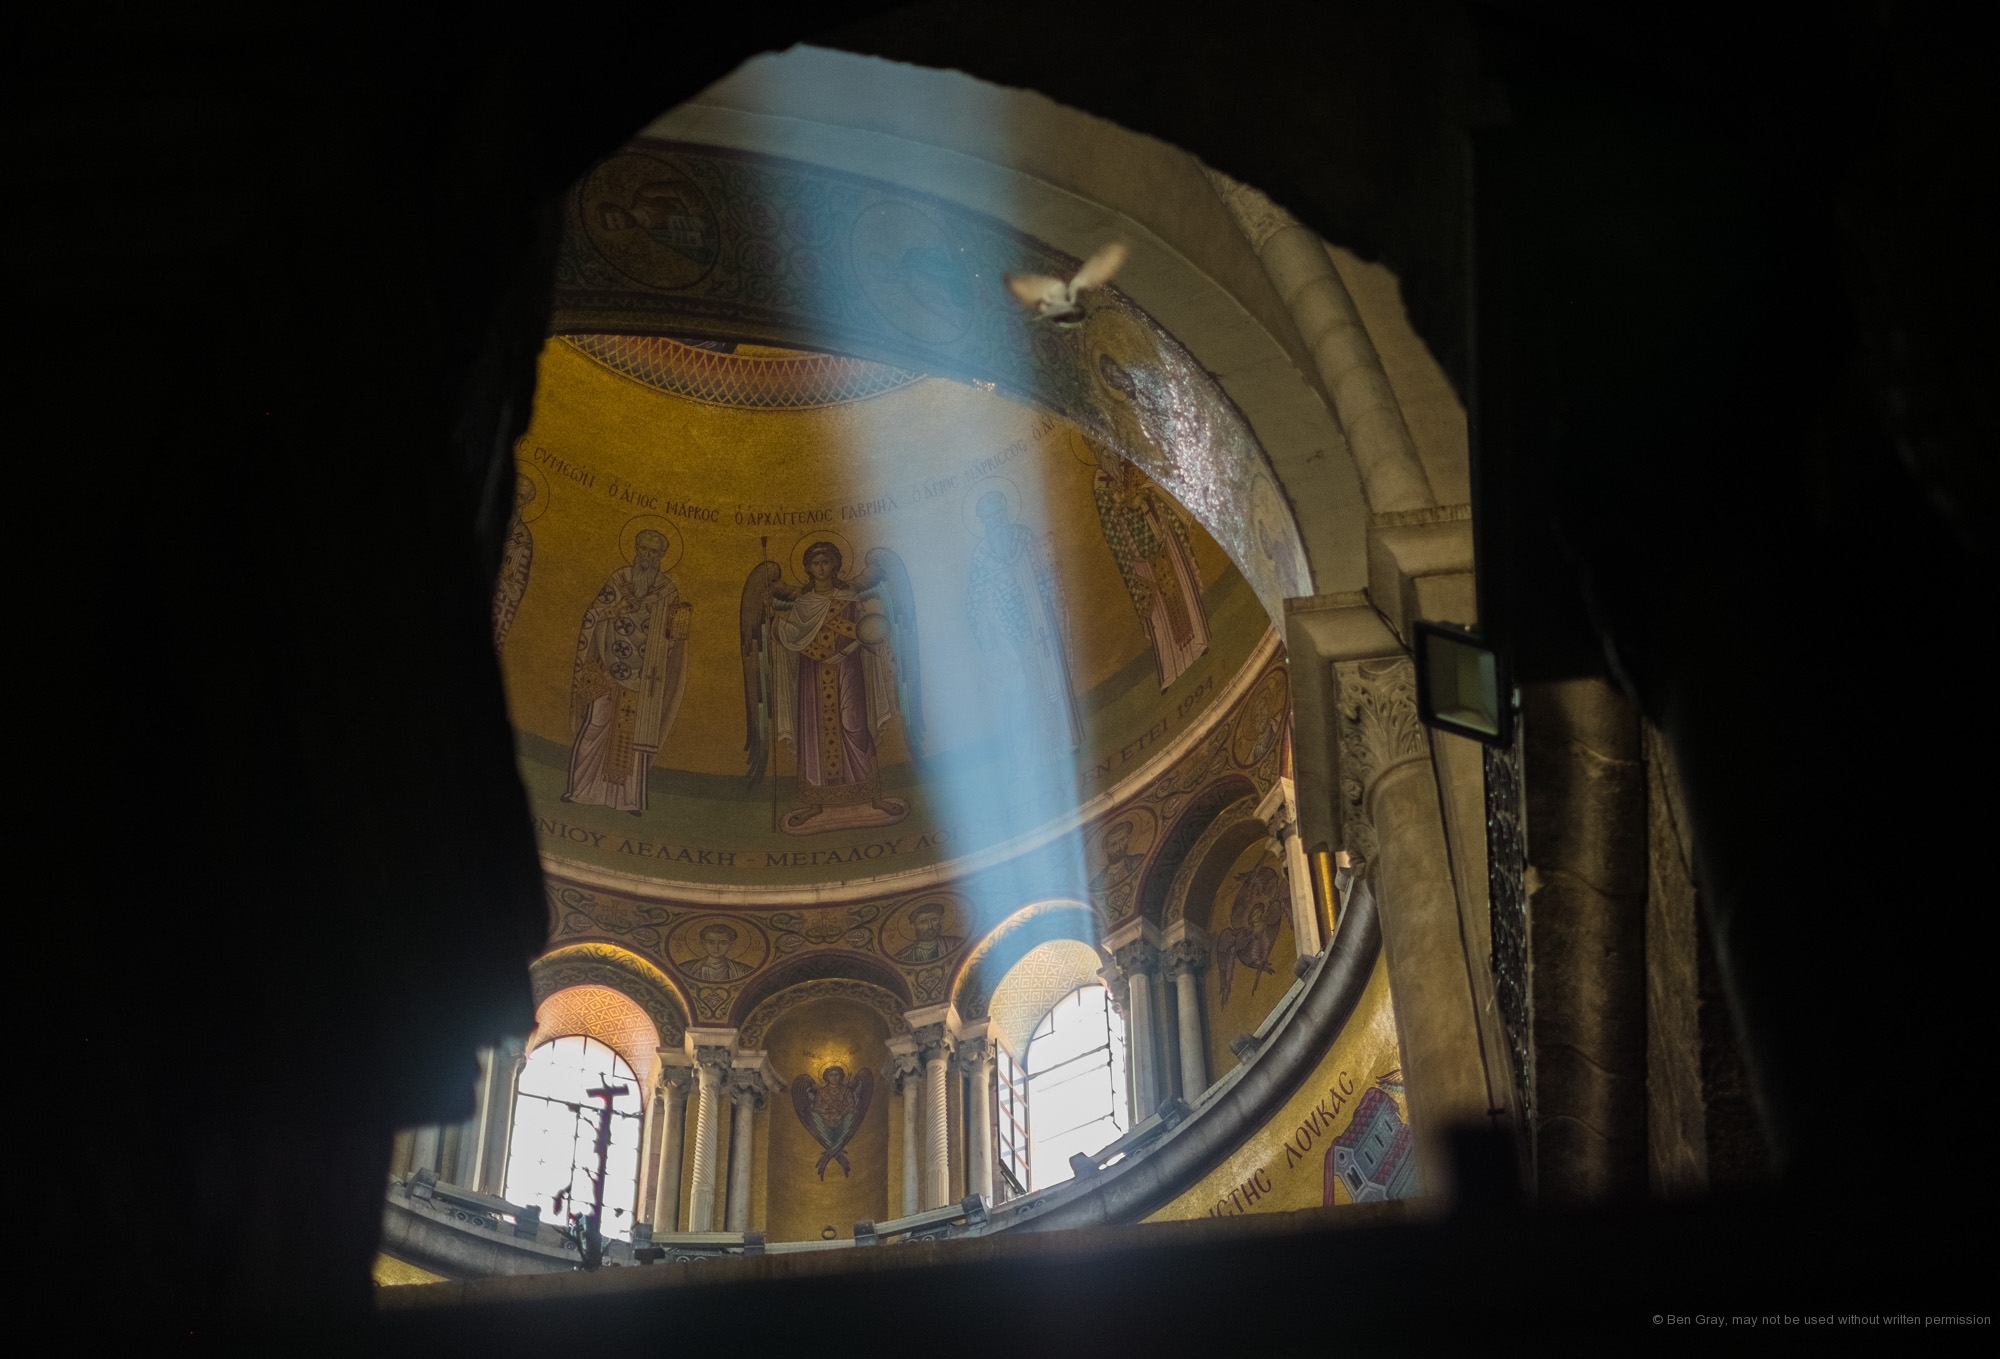 A beam of light shines through a window in the Church of the Holy Sepulchre's dome.